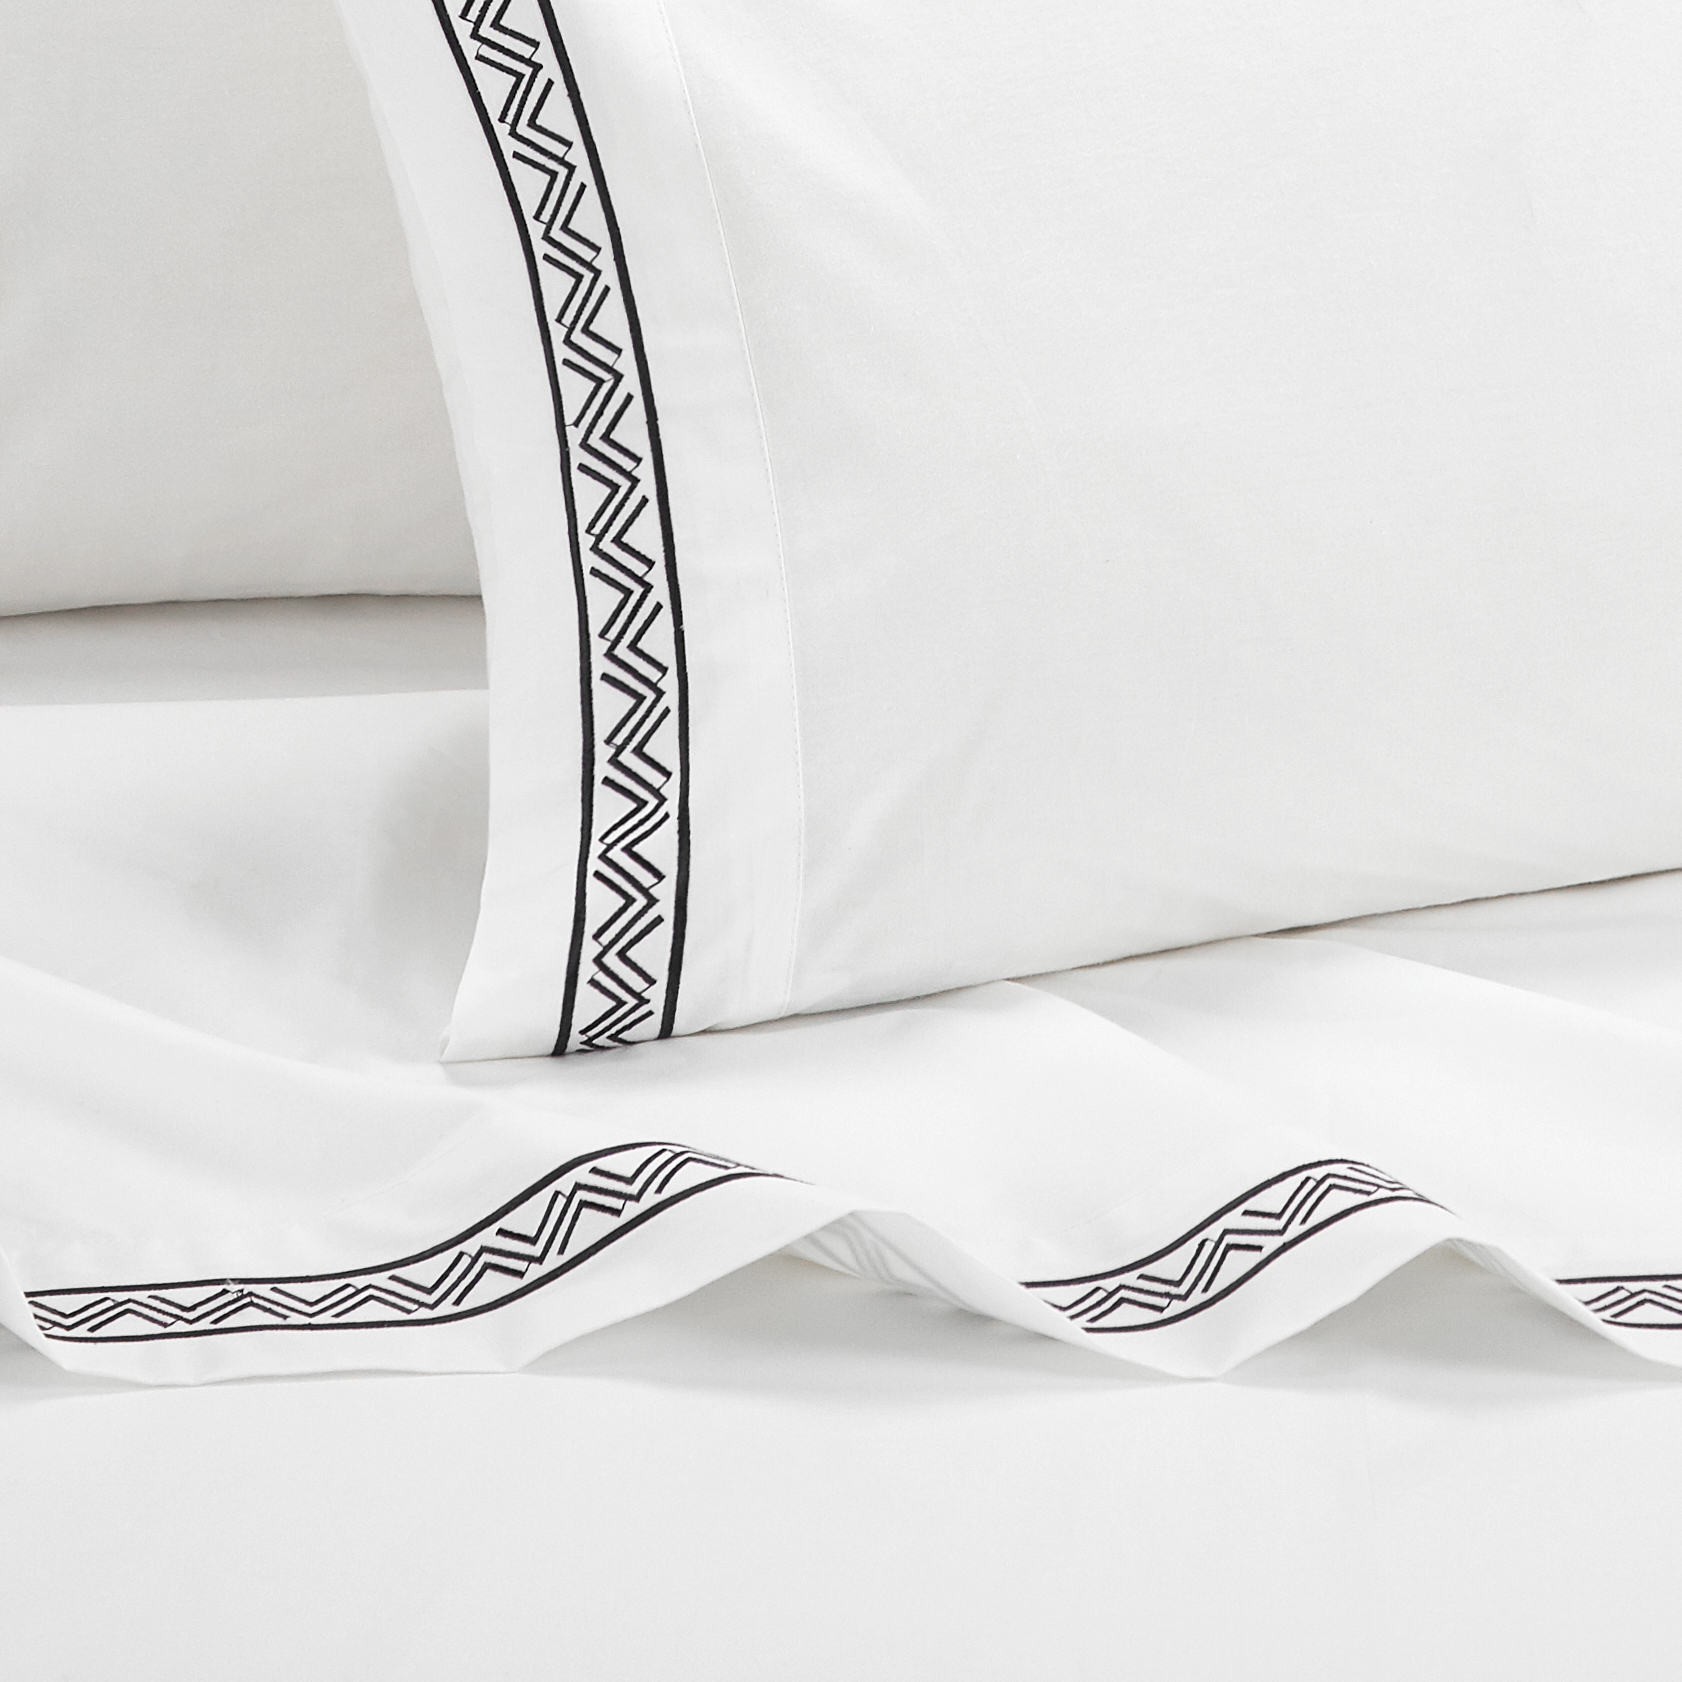 4 Piece Orden Organic Cotton Sheet Set Solid White With Dual Stripe Embroidery - Black, Queen